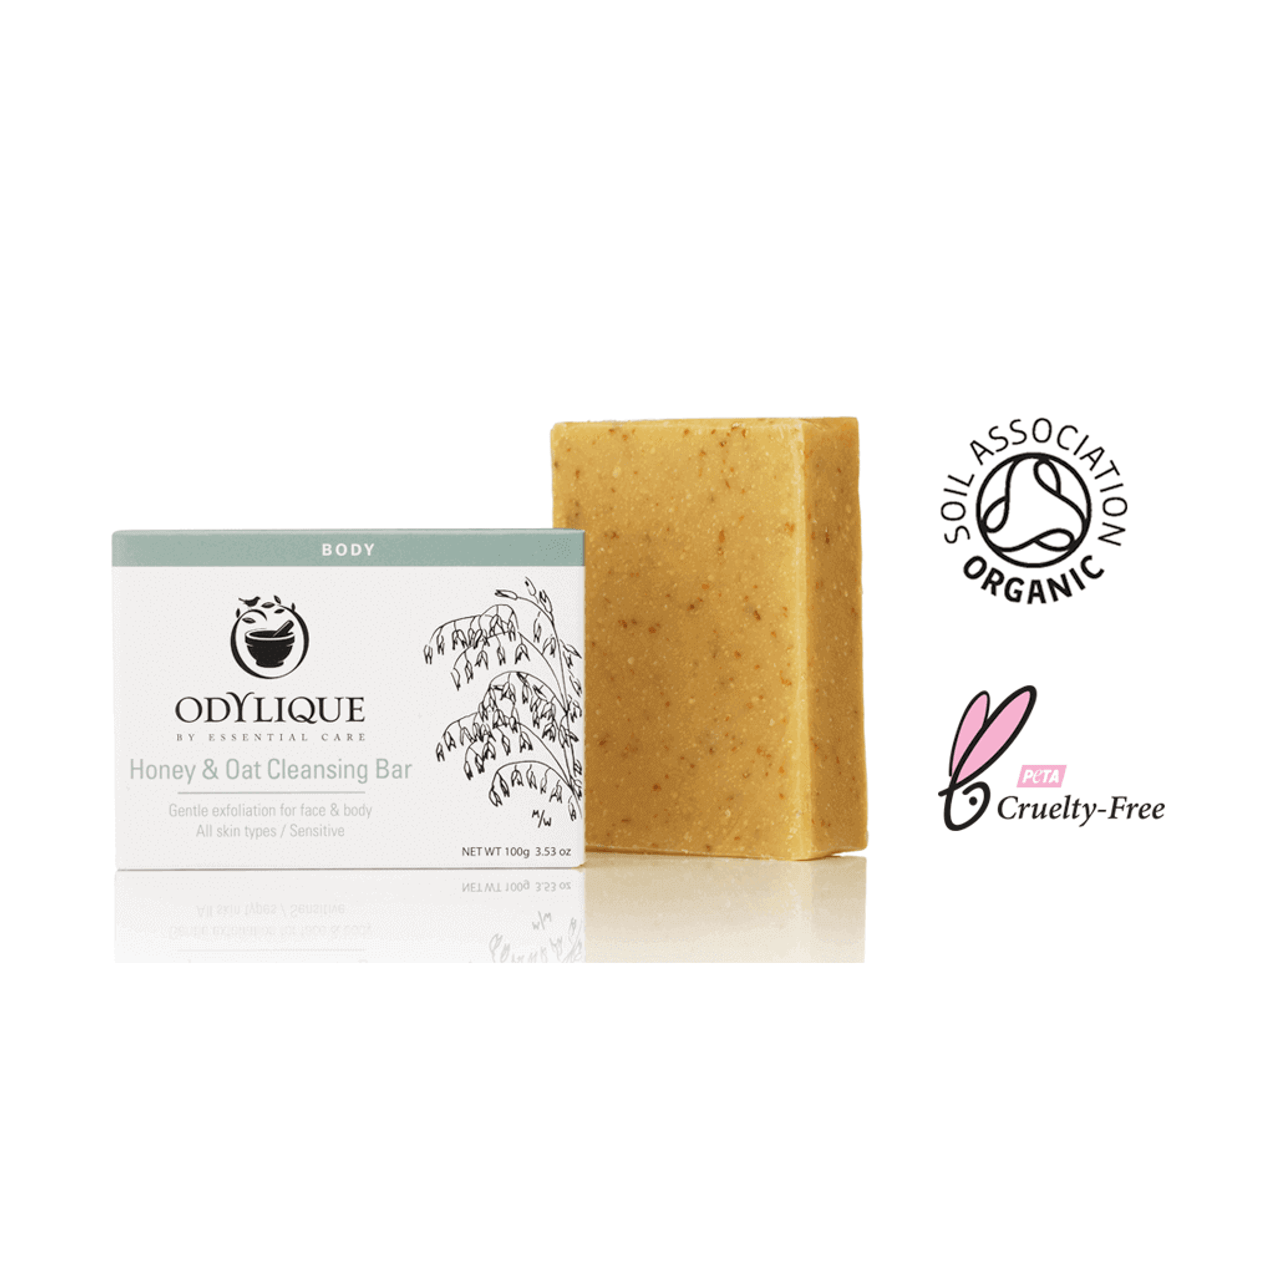 Natural soap for fresh skin, against acne and little wrinkles